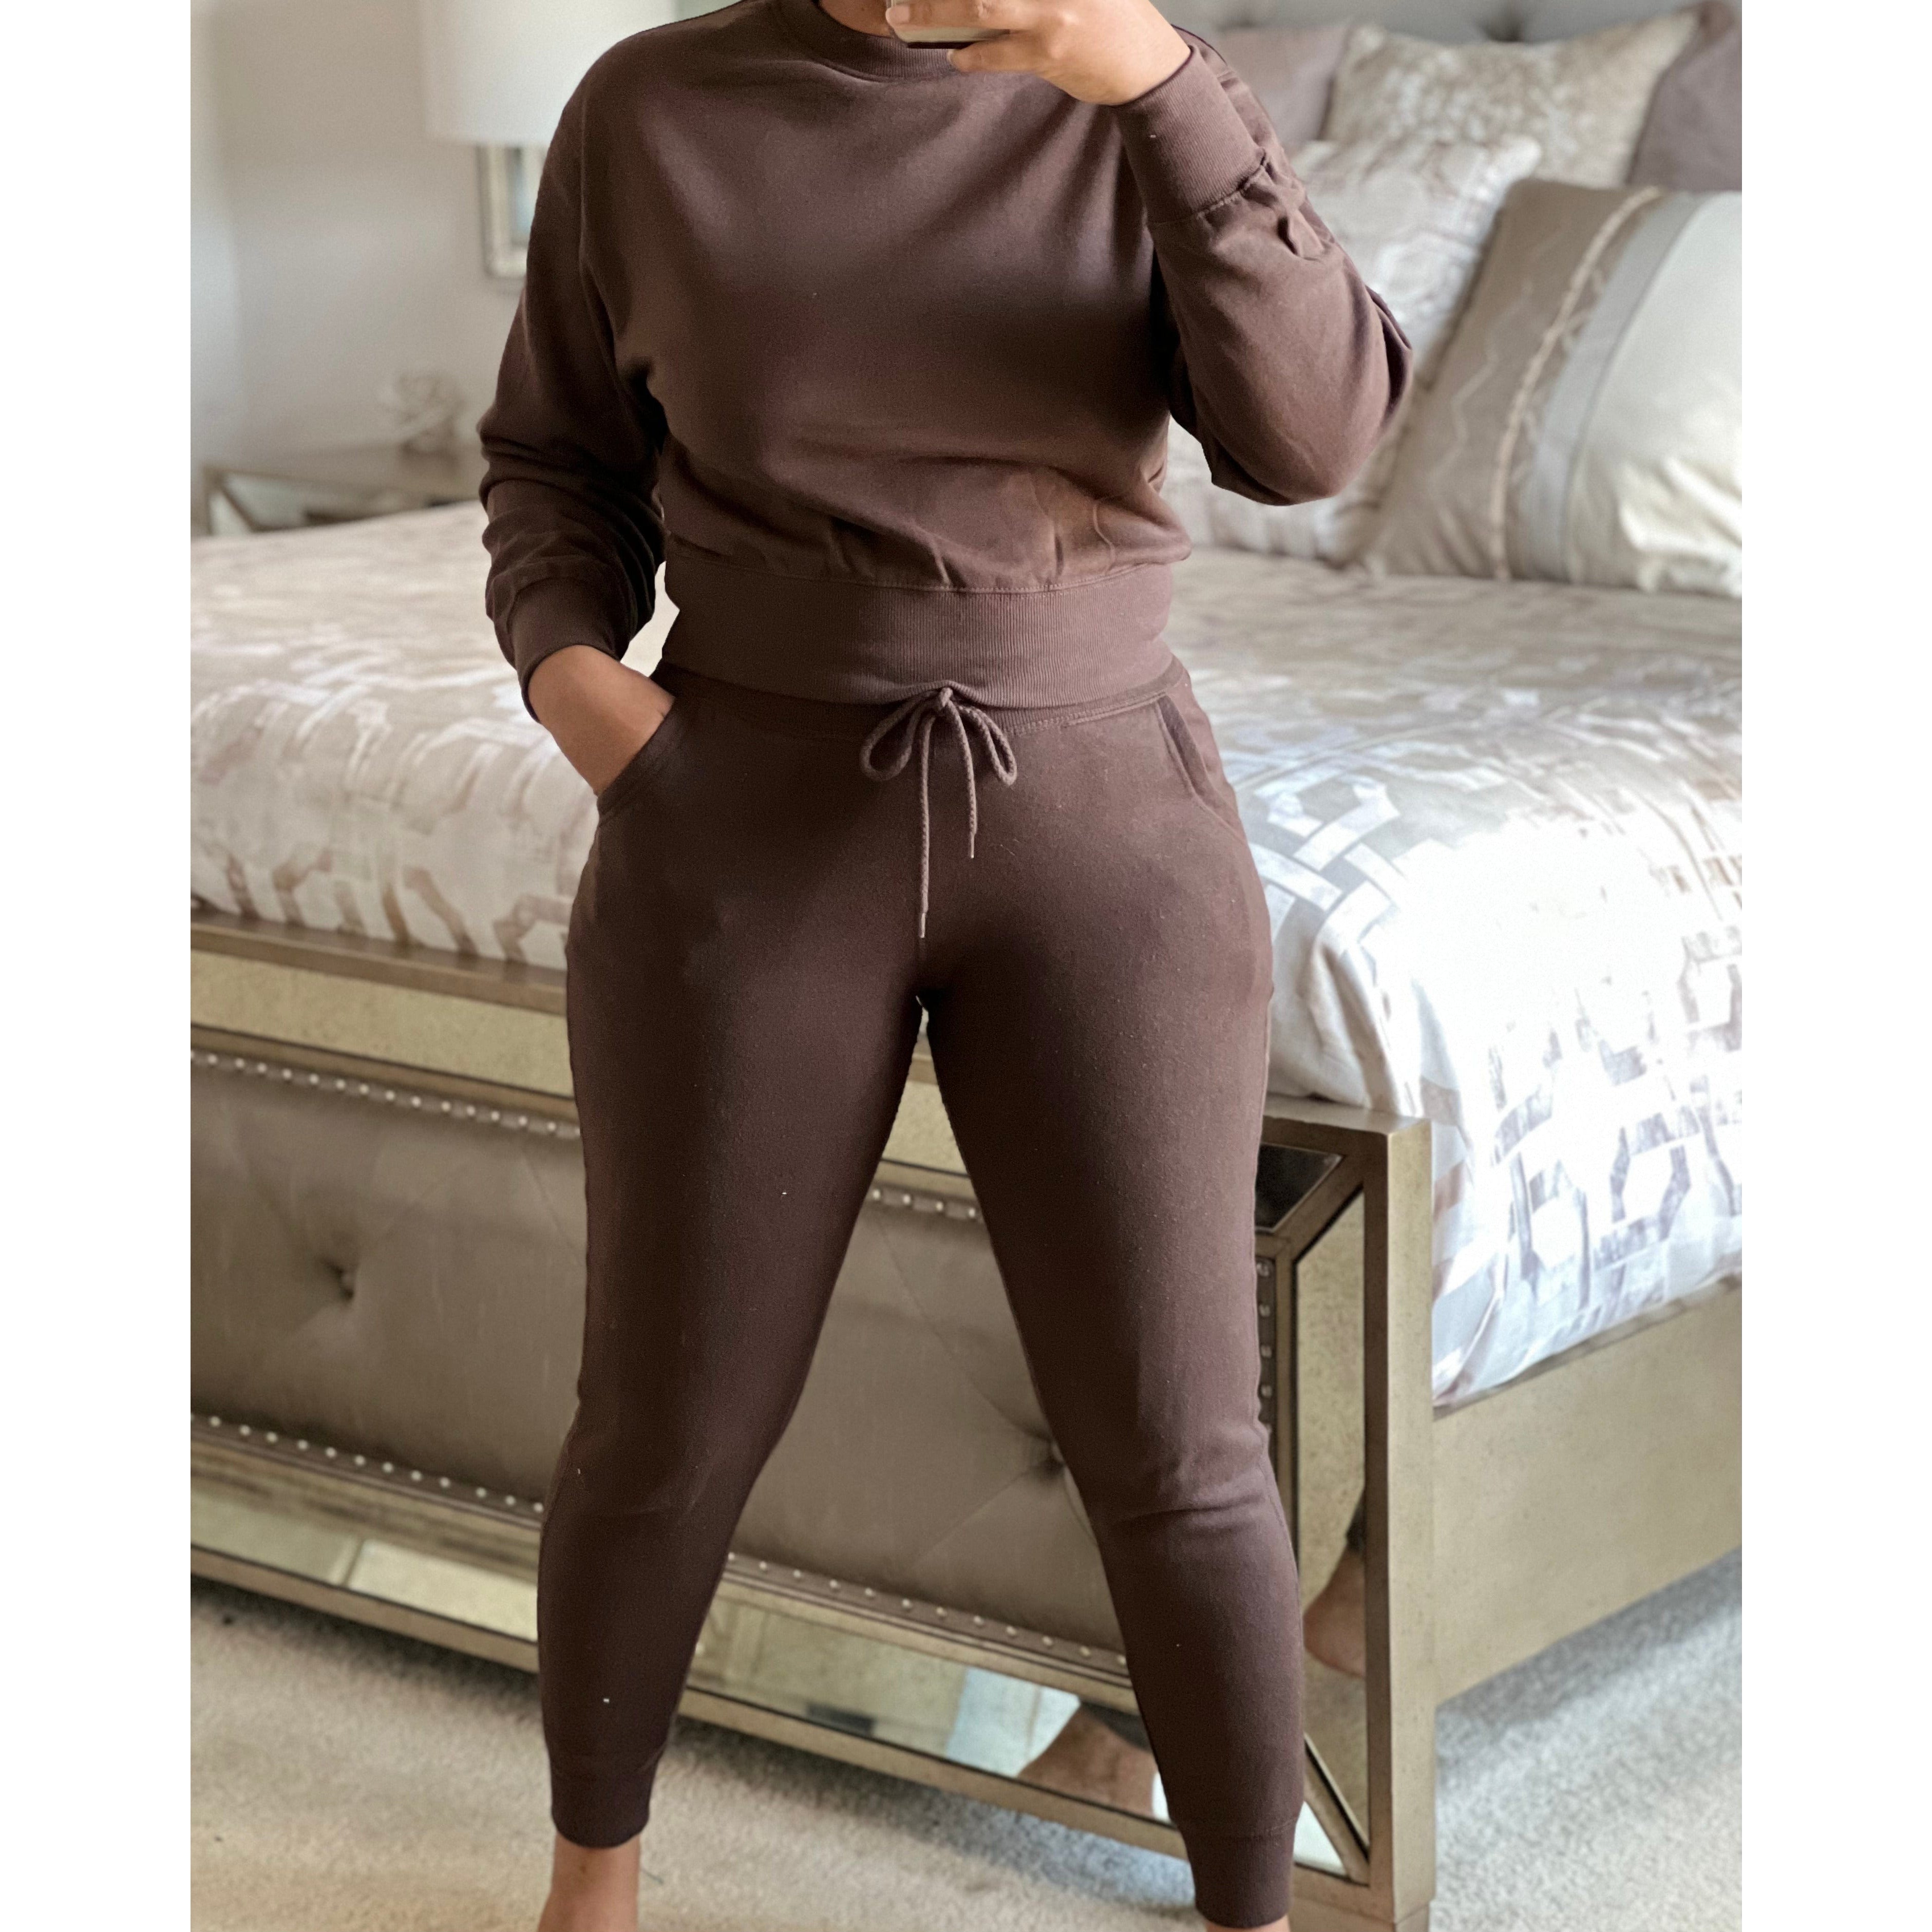 Apparel & Accessories Chocolate Jogger Set-Pants with back pocket